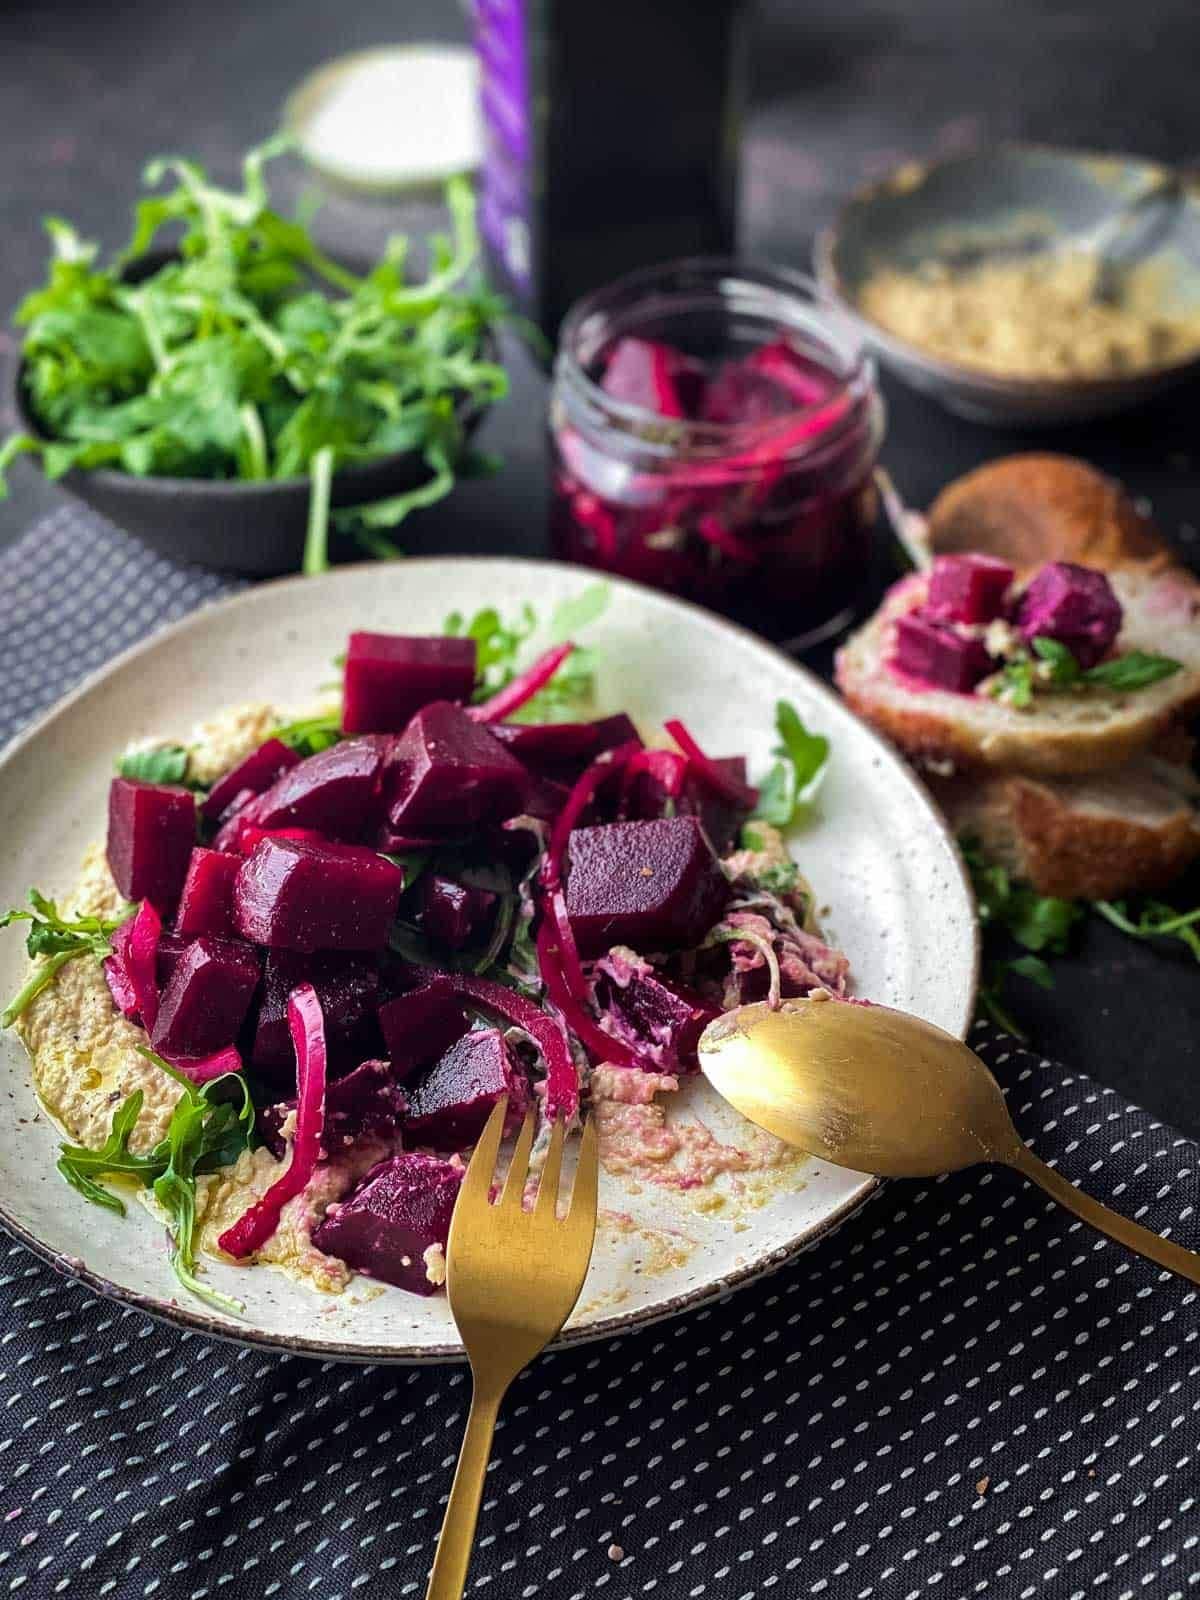 Pickled beetroot salad on chickpea mash served on a white plate and gold cutlery with bread, olive oil, arugula and pickled beets on the side